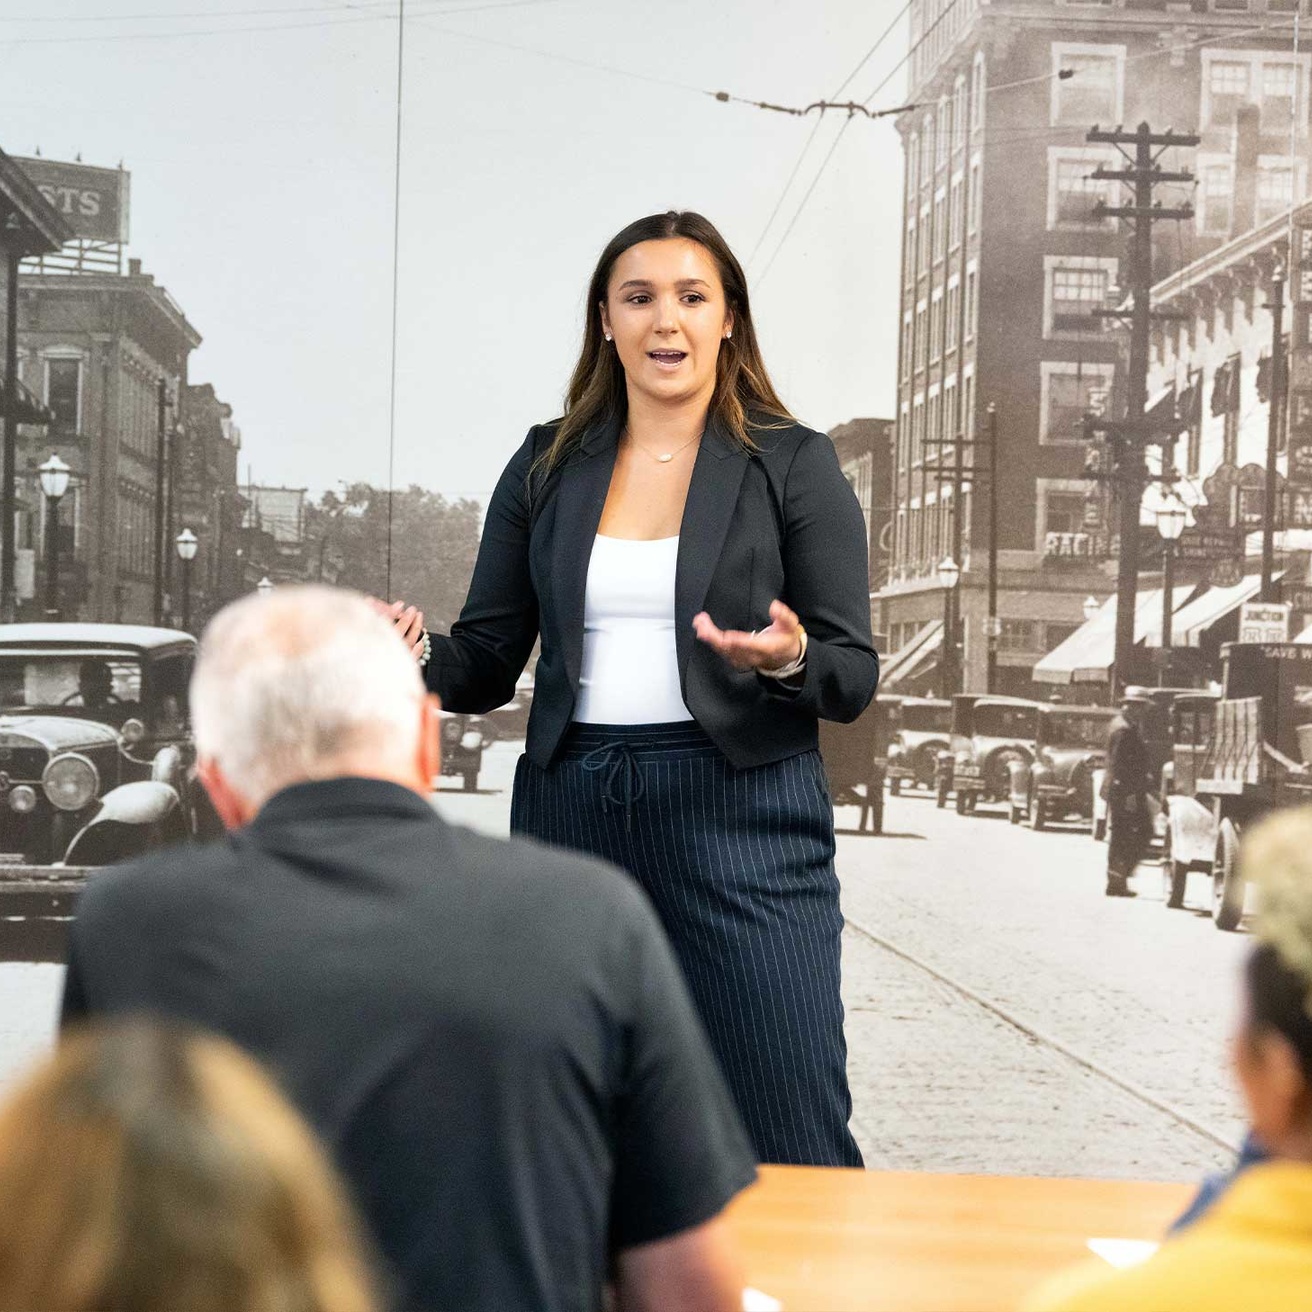 Woman student standing up and presenting to a group of people